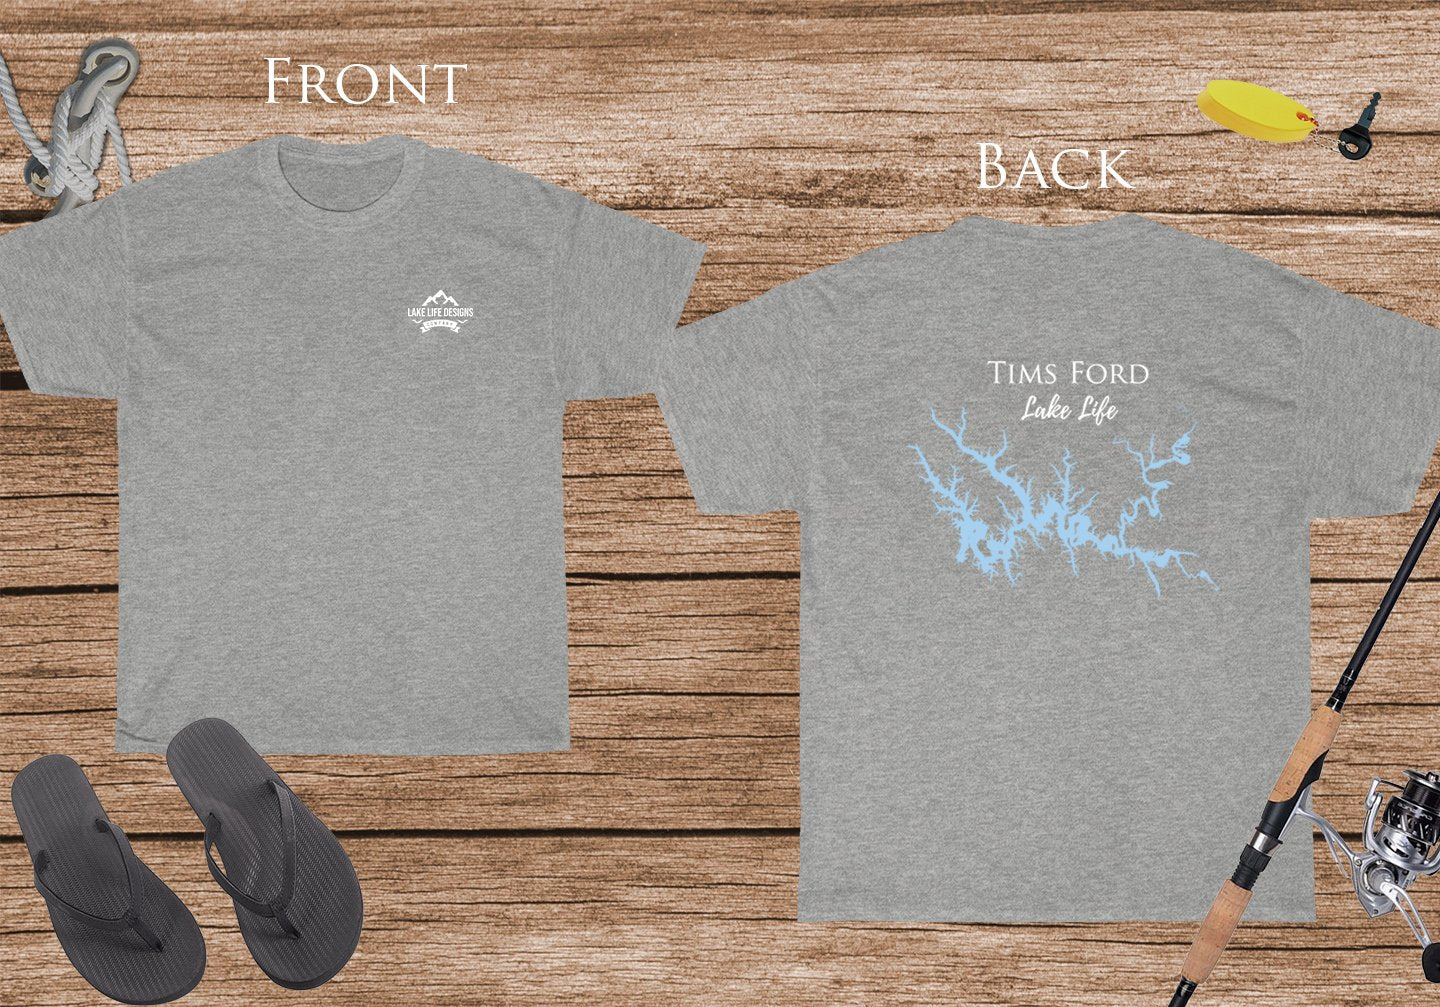 Tims Ford Lake Life - Cotton Short Sleeved - FRONT & BACK PRINTED - Short Sleeved Cotton Tee - Tennessee Lake